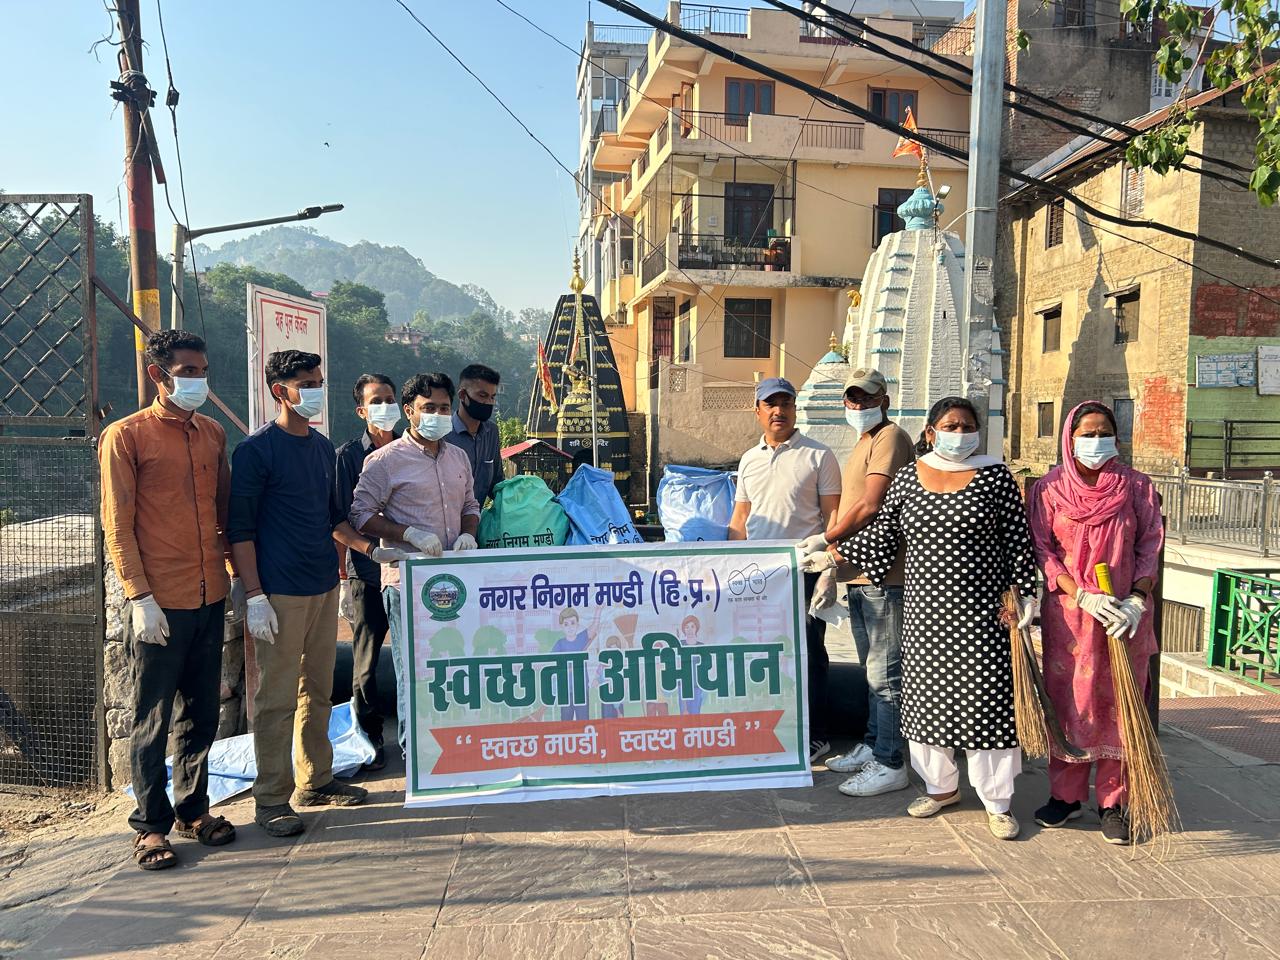 Today, a cleanliness campaign was conducted by Municipal Corporation Mandi and district administration